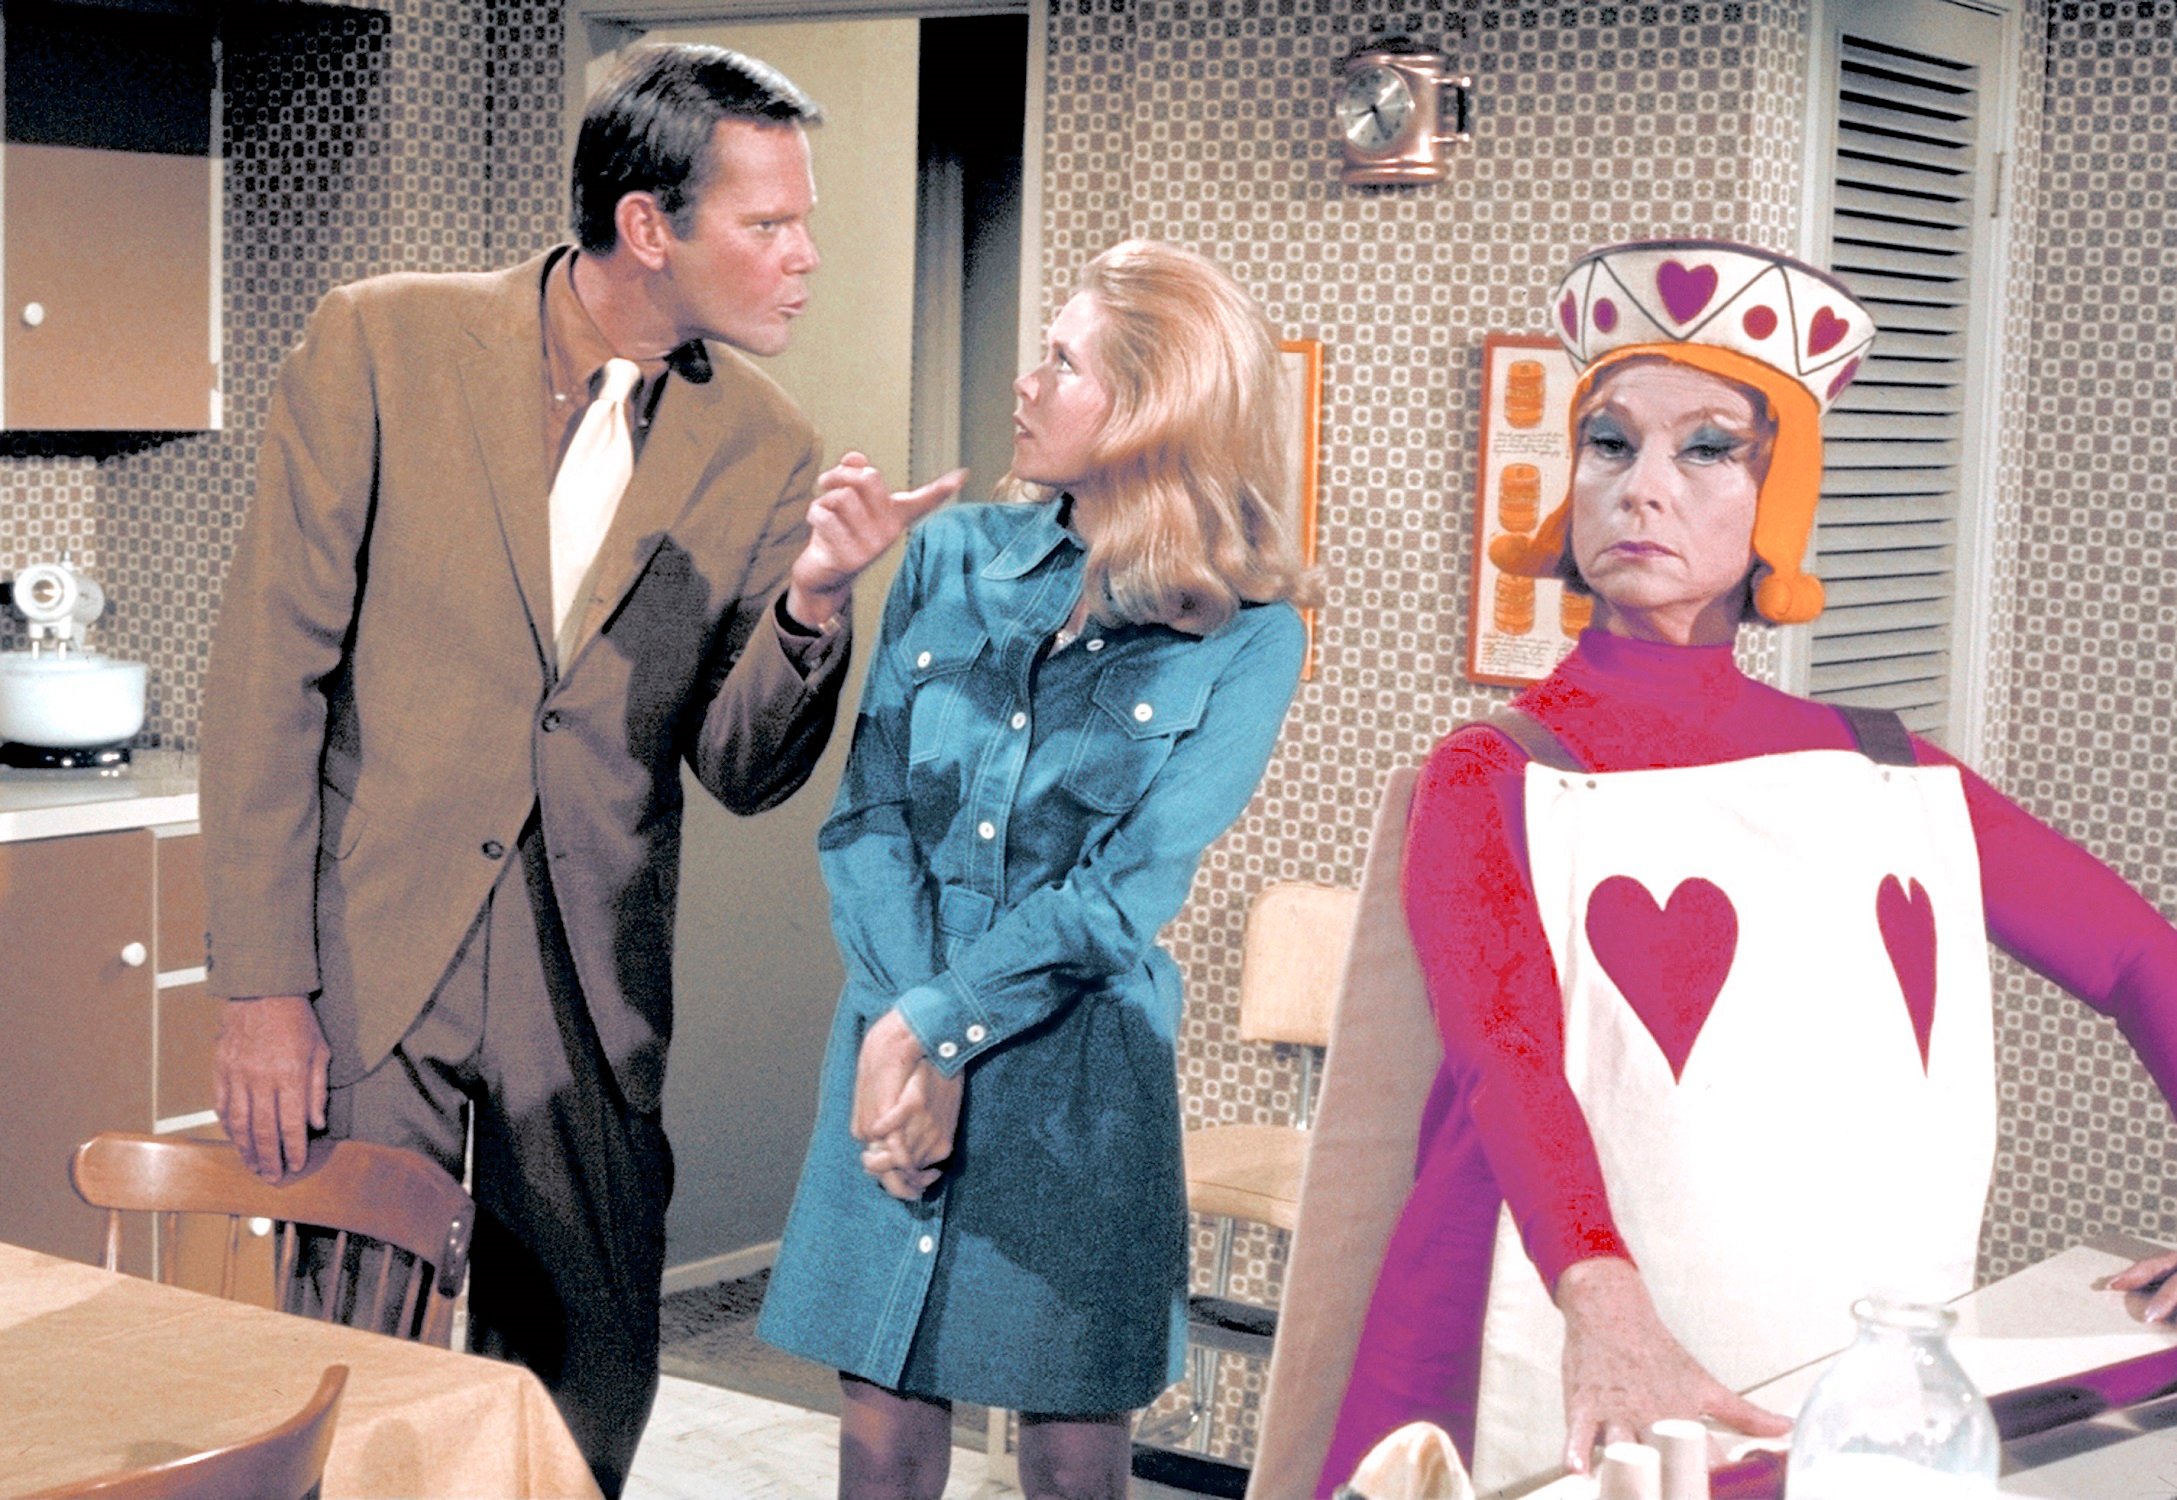 #39 Bewitched #39 : The Reason Agnes Moorehead MadeSargent Cry